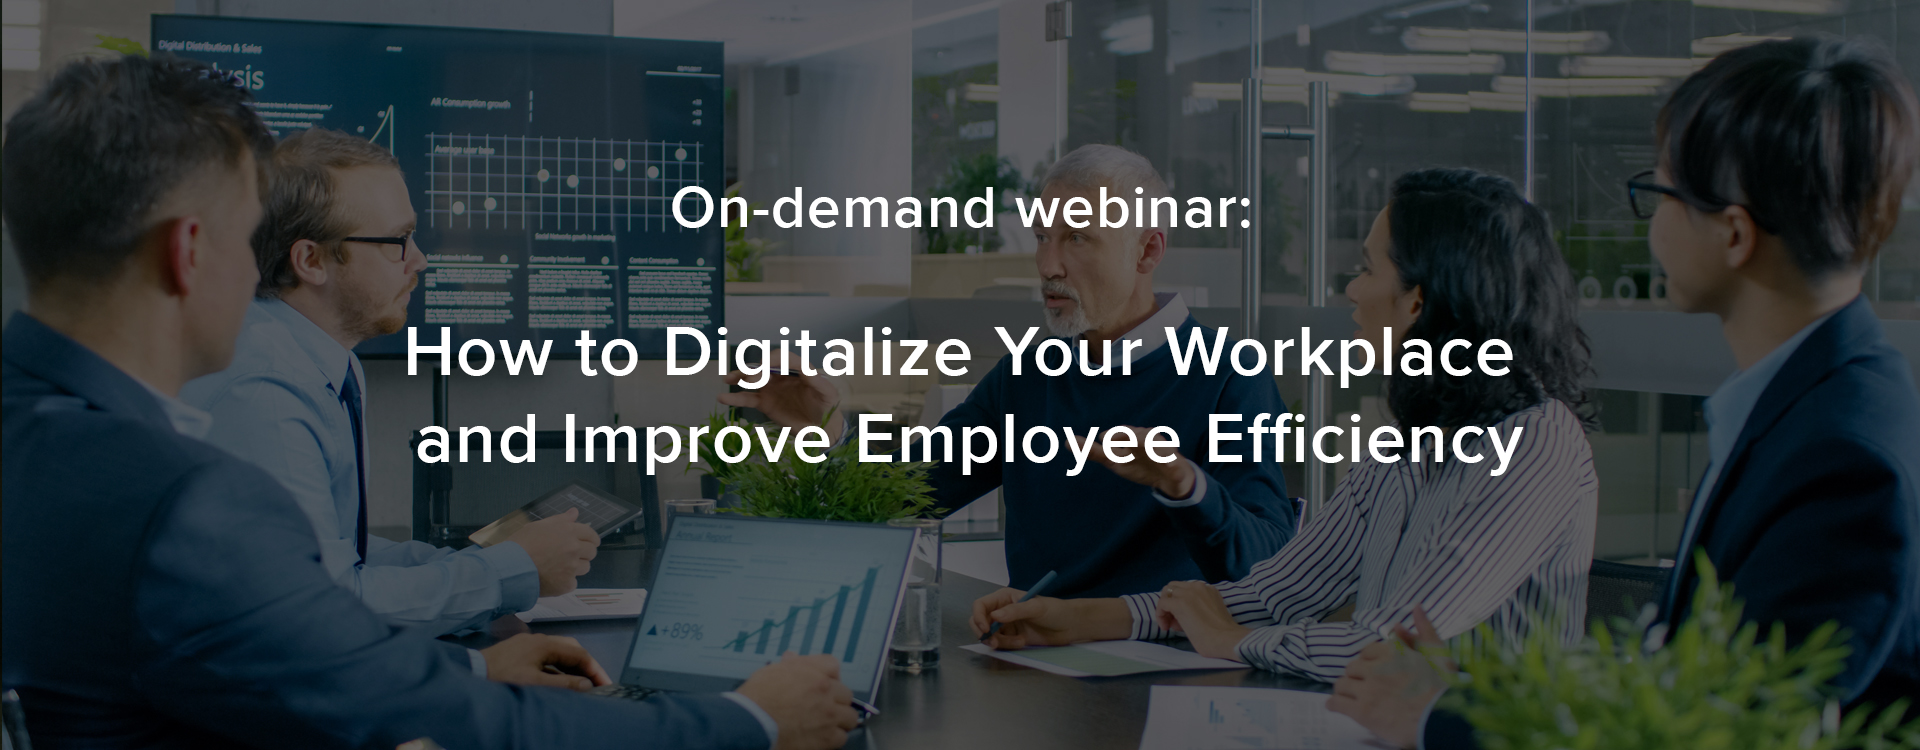 how to digitalize your workplace and improve employee efficiency